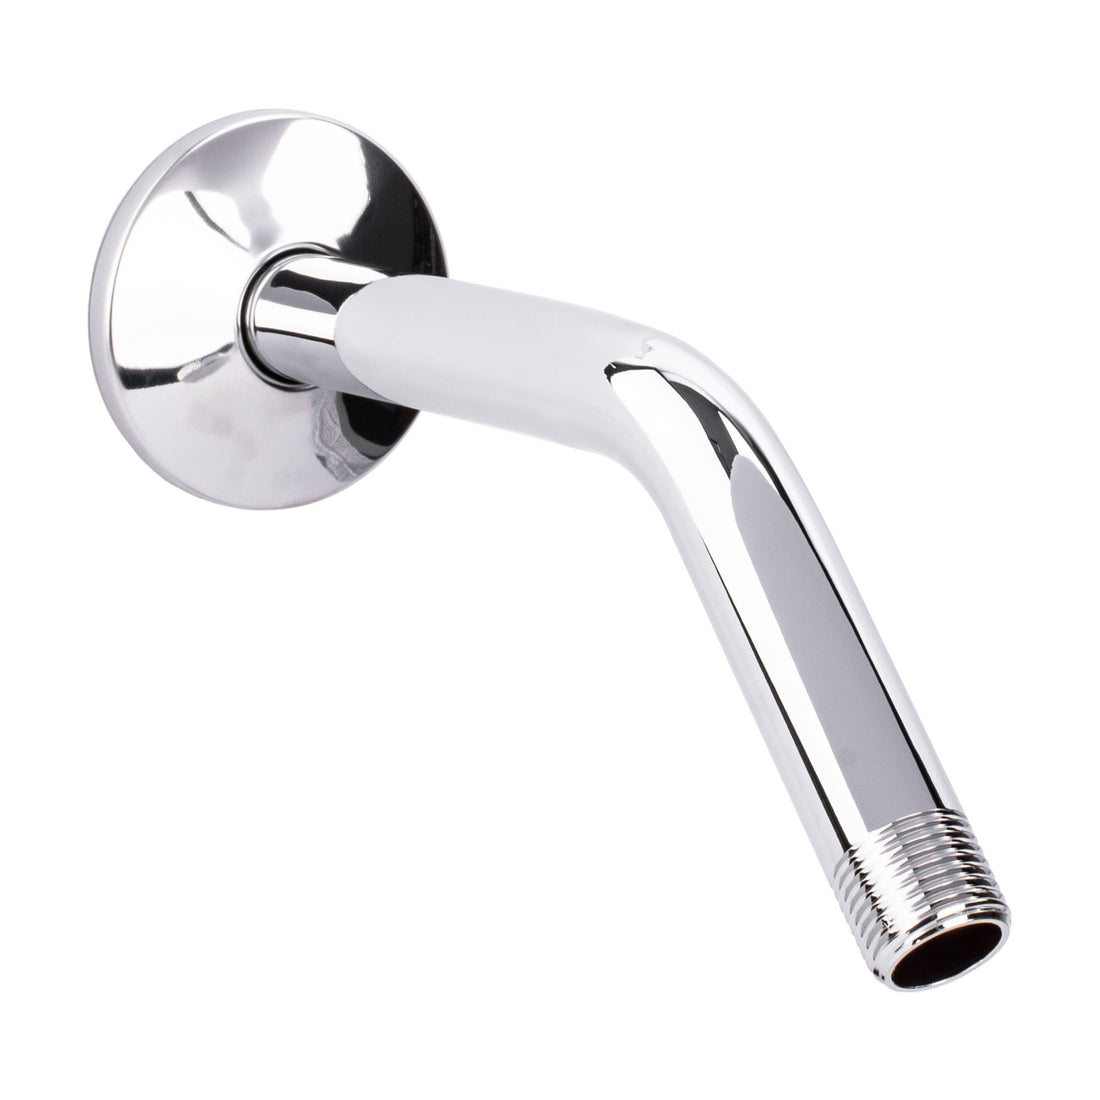 8 in. Stainless Steel Shower Head Extension Arm with Flange (Chrome Finish) - Utility sinks vanites Tehila